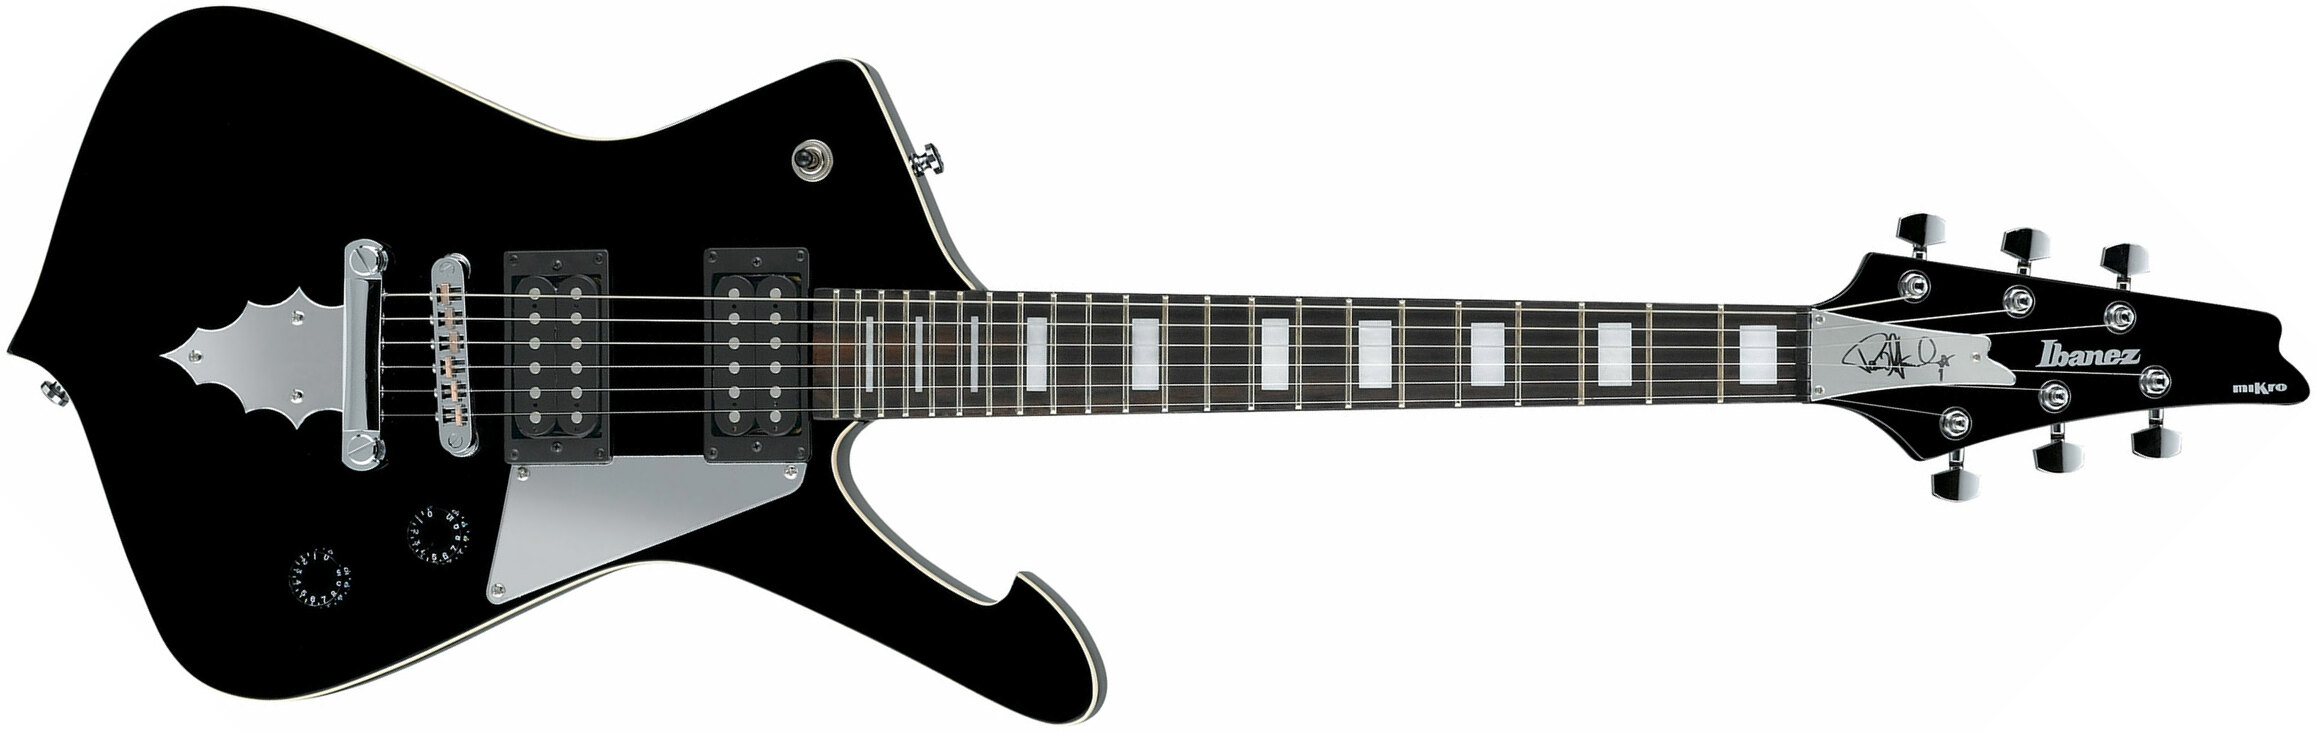 Ibanez Paul Stanley Psm10 Bk Signature Hh Ht Eb - Black - Electric guitar for kids - Main picture